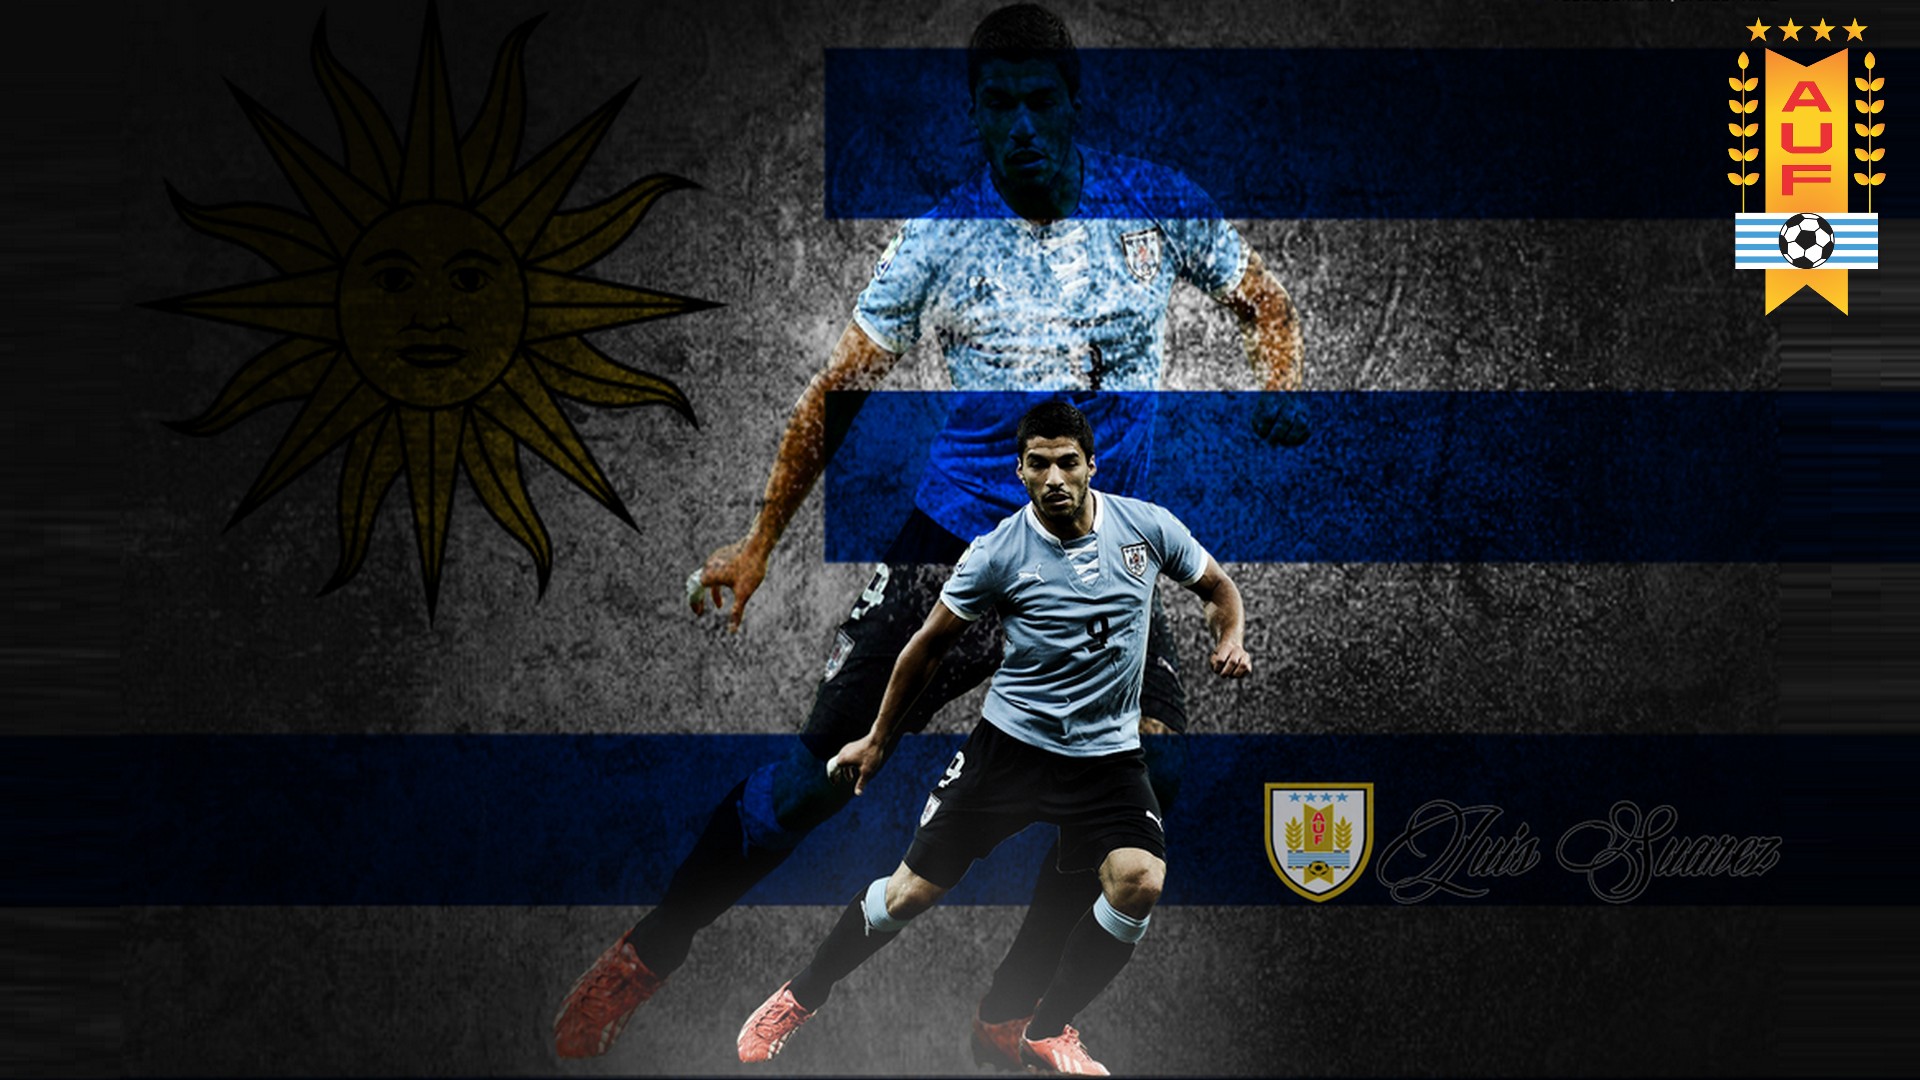 Luis Suarez Uruguay HD Wallpapers with resolution 1920x1080 pixel. You can make this wallpaper for your Mac or Windows Desktop Background, iPhone, Android or Tablet and another Smartphone device